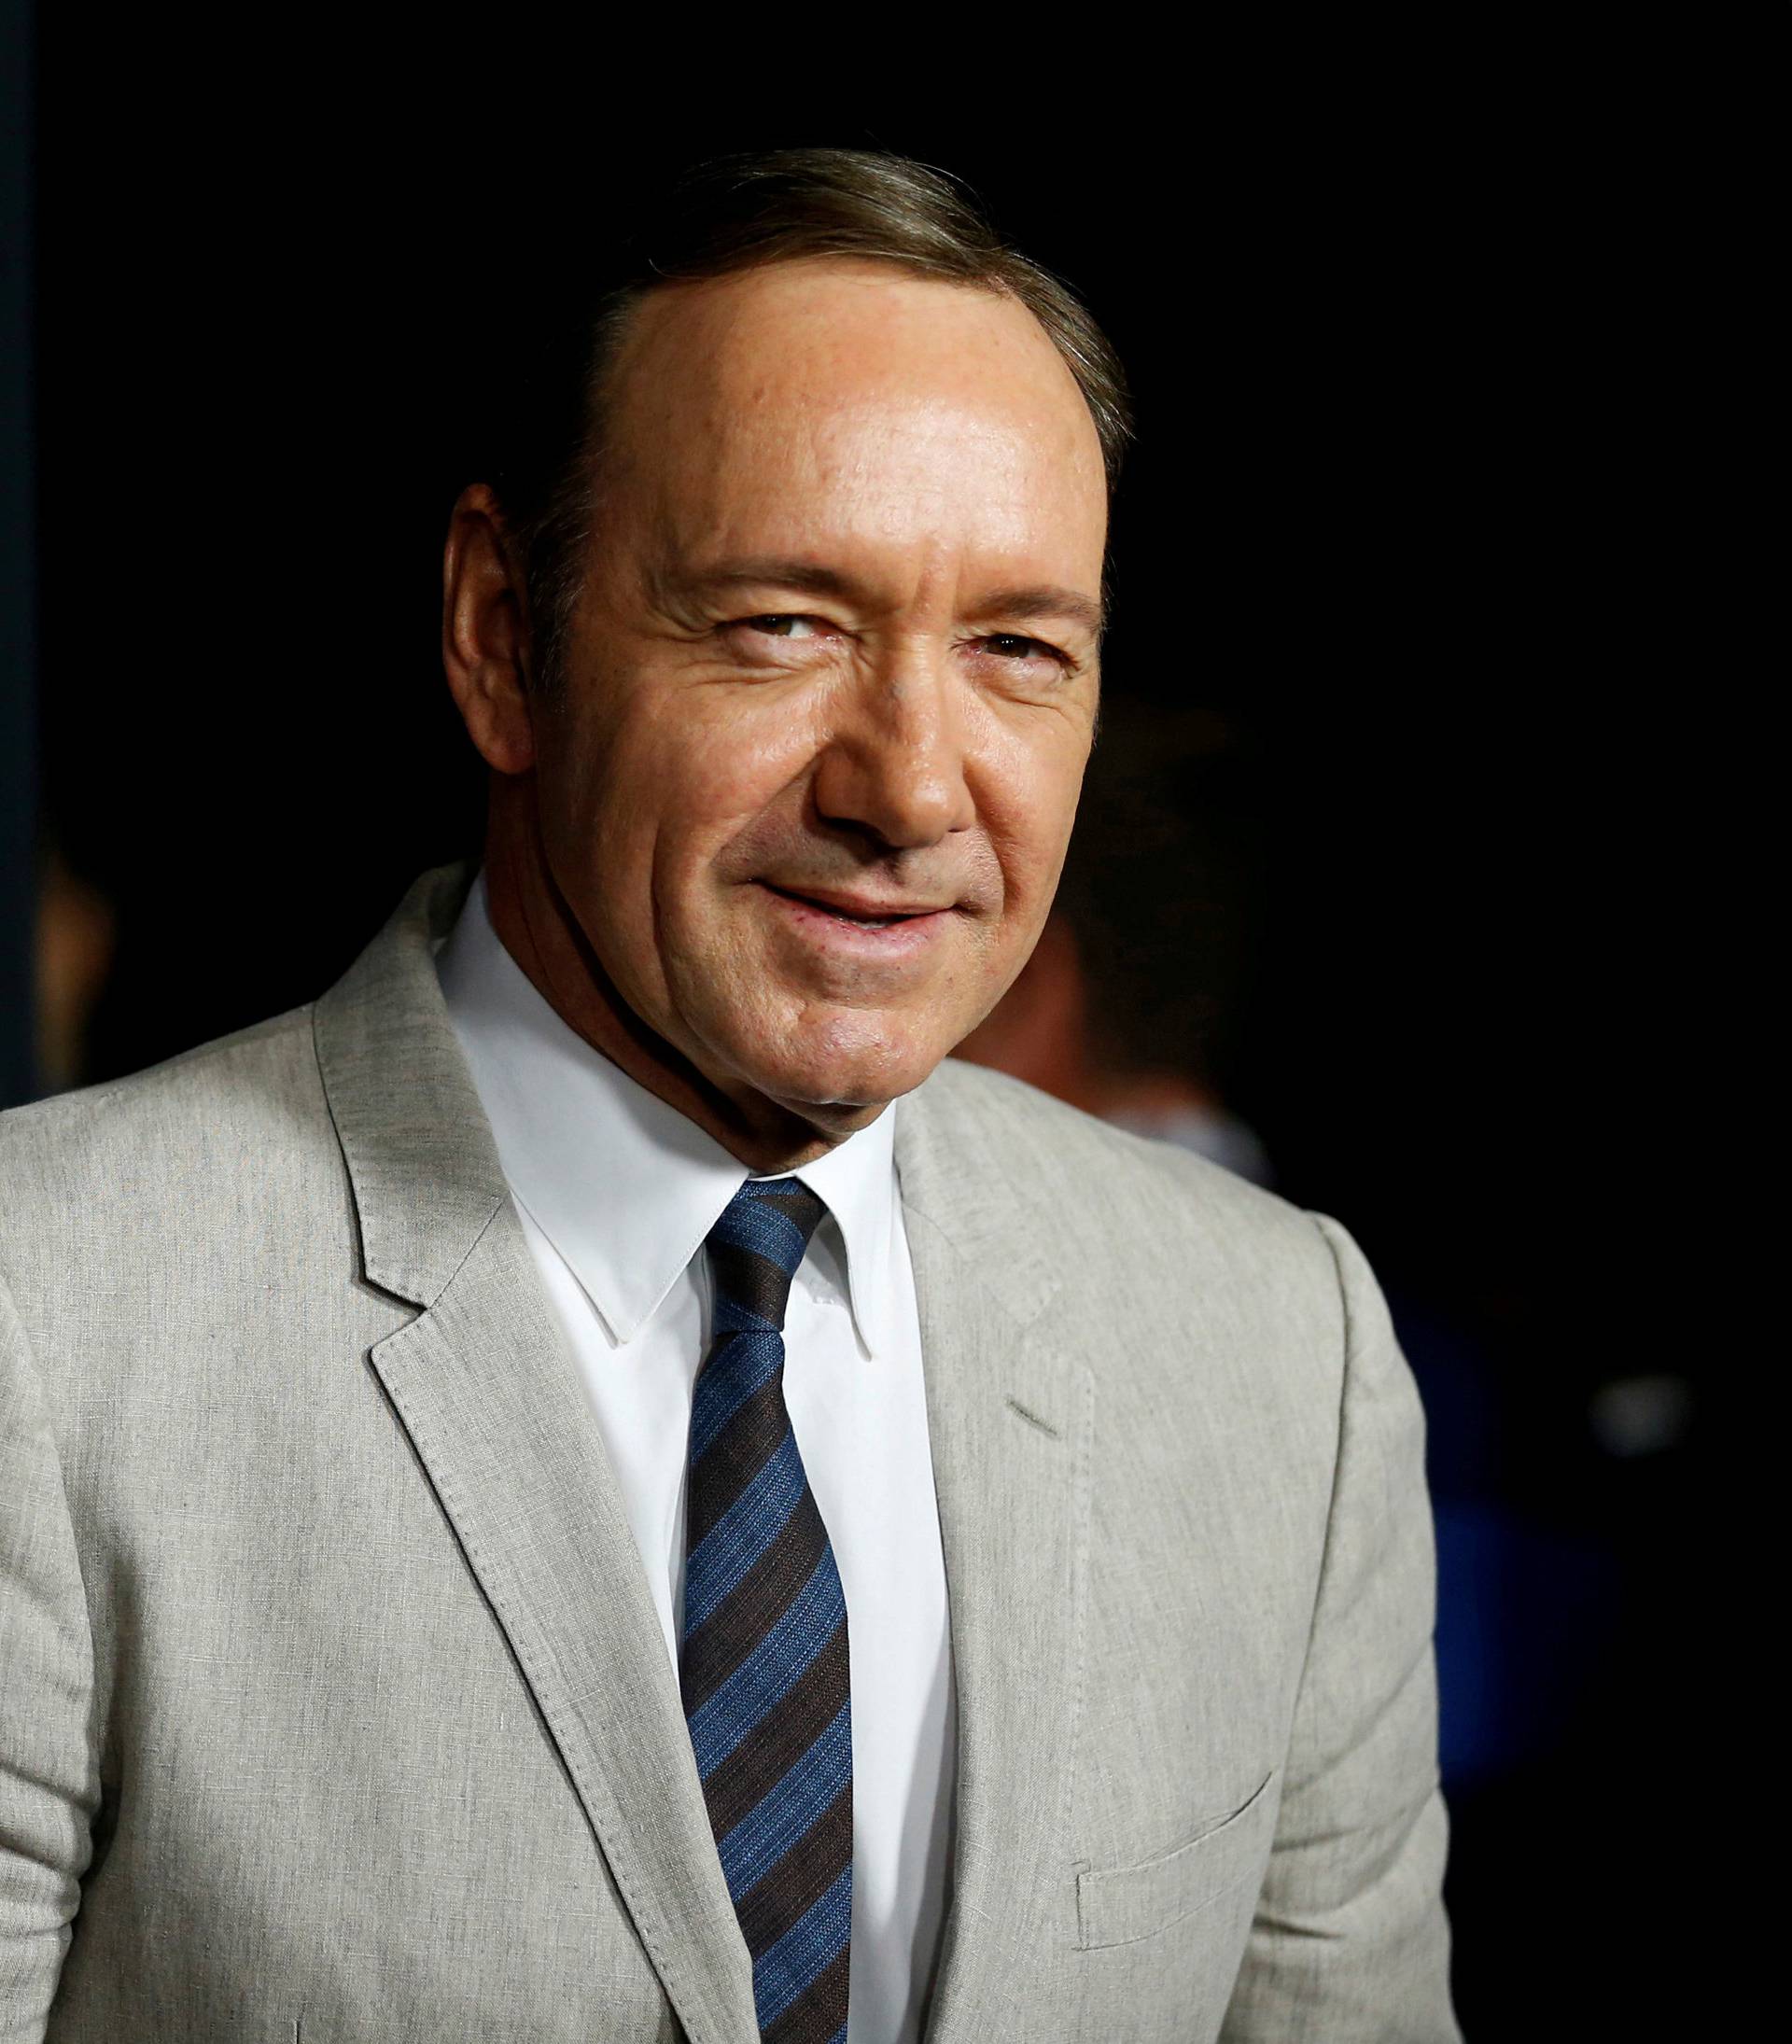 FILE PHOTO: Cast member Spacey poses at the premiere for the second season of the television series "House of Cards" at the Directors Guild of America in Los Angeles